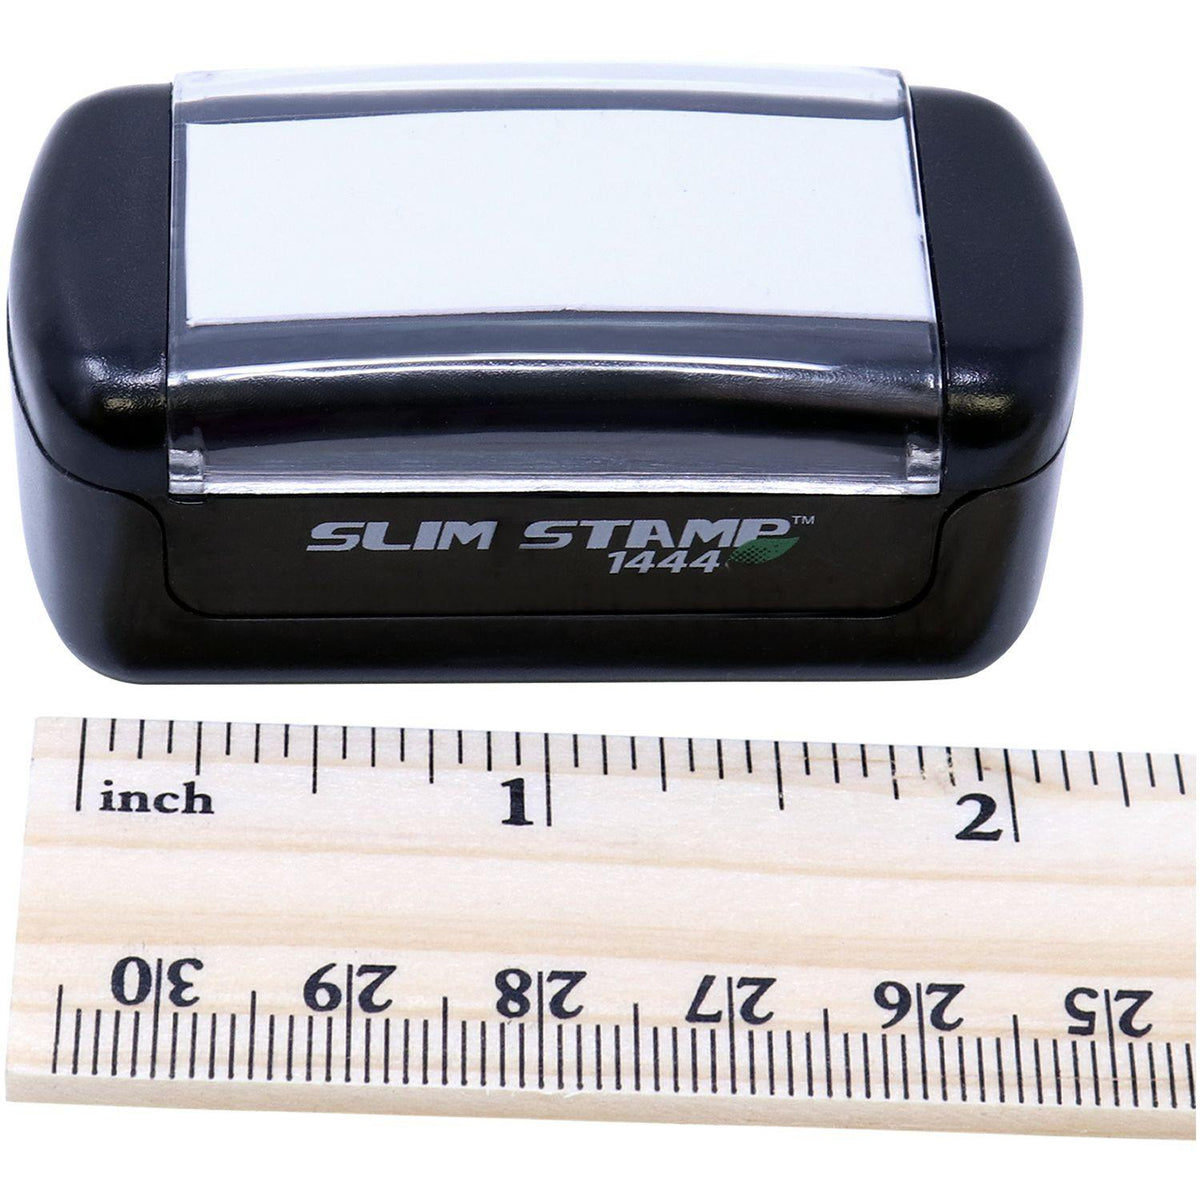 Measurement Slim Pre Inked Hmo Ppo Stamp with Ruler